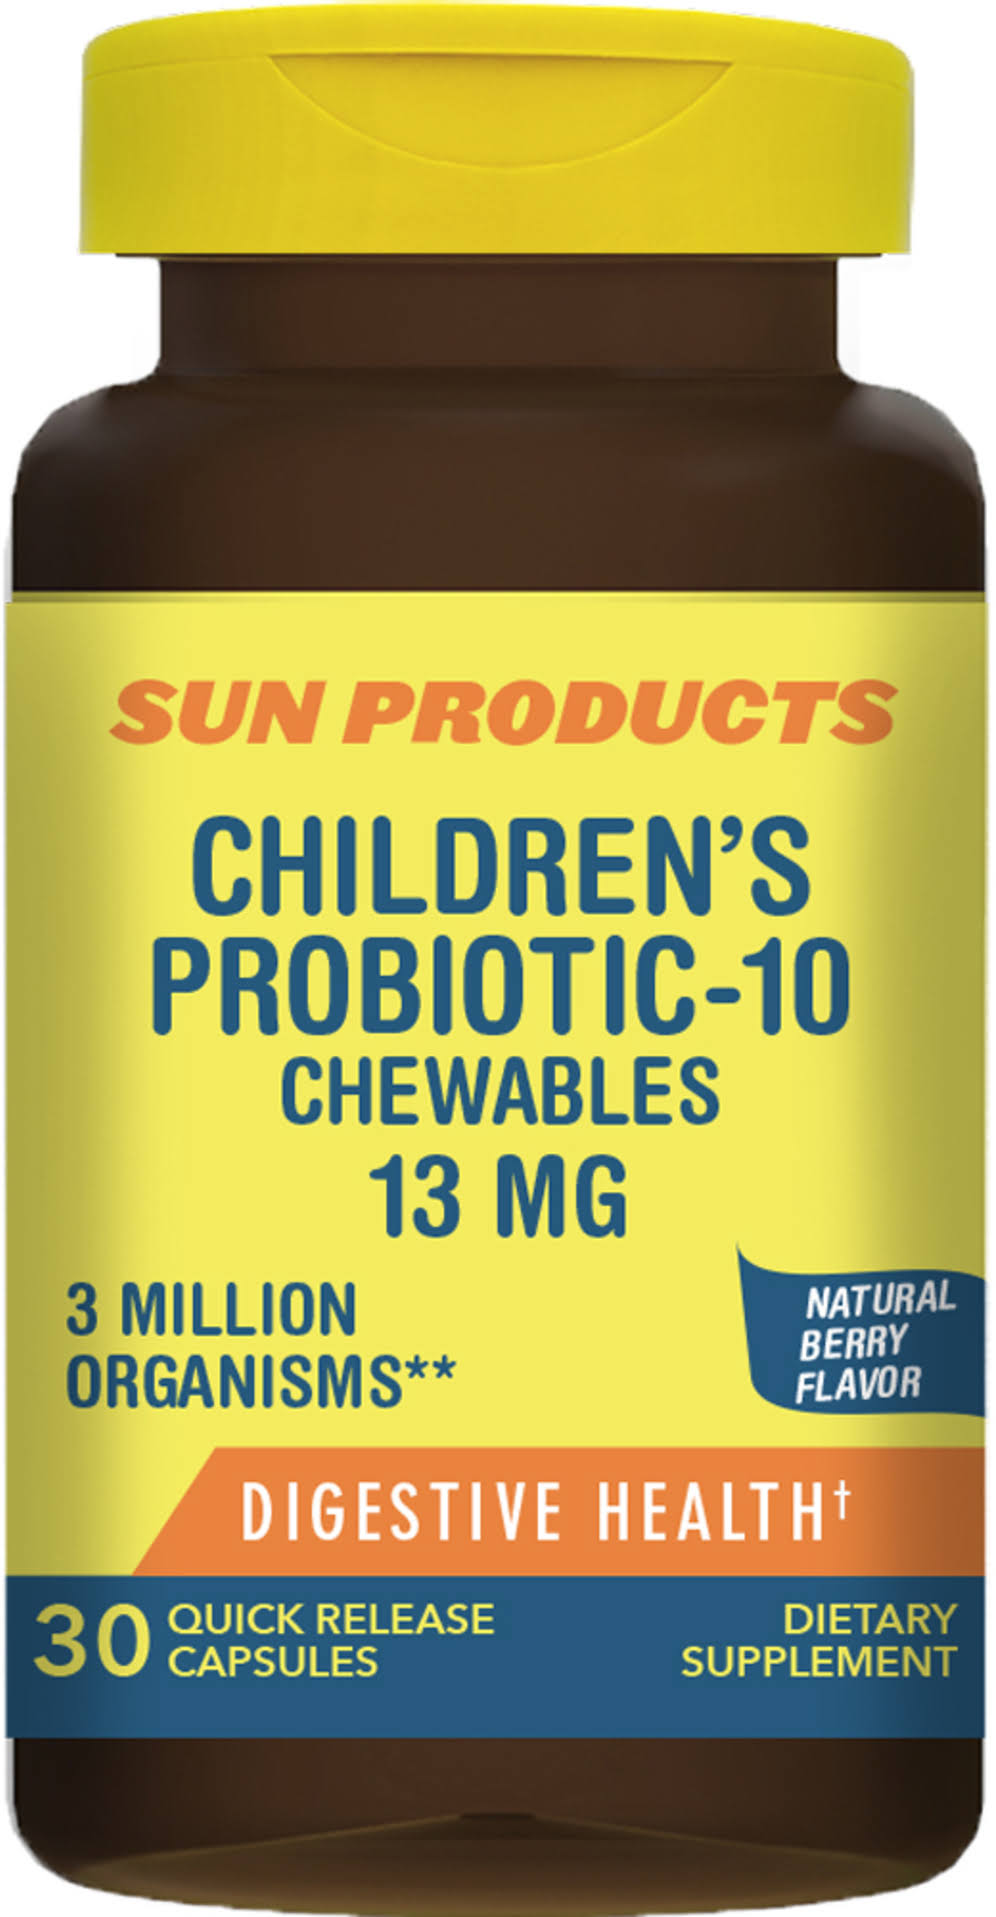 Sundance Kid's Probiotic Chewable Tablets Natural Berry